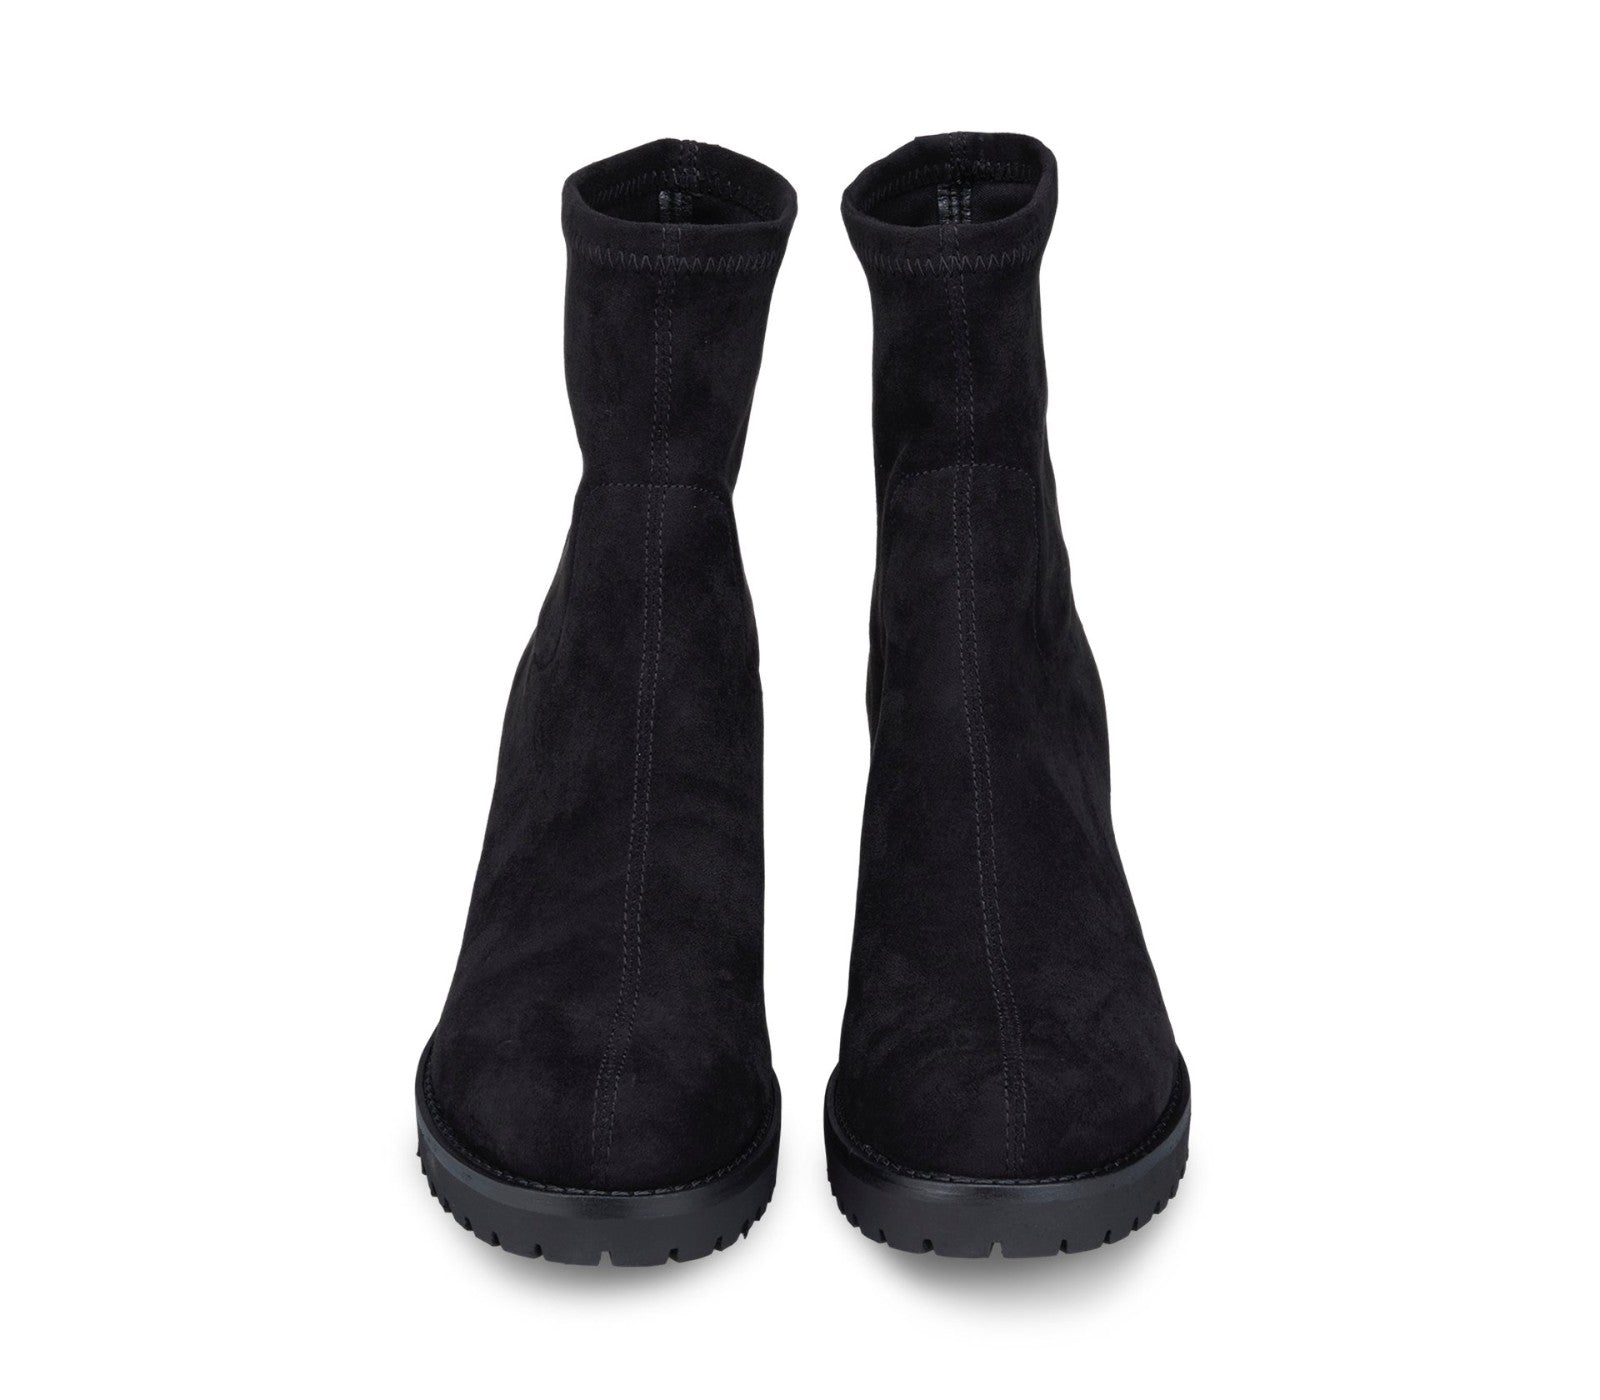 Women's Black Suede Ankle Boots